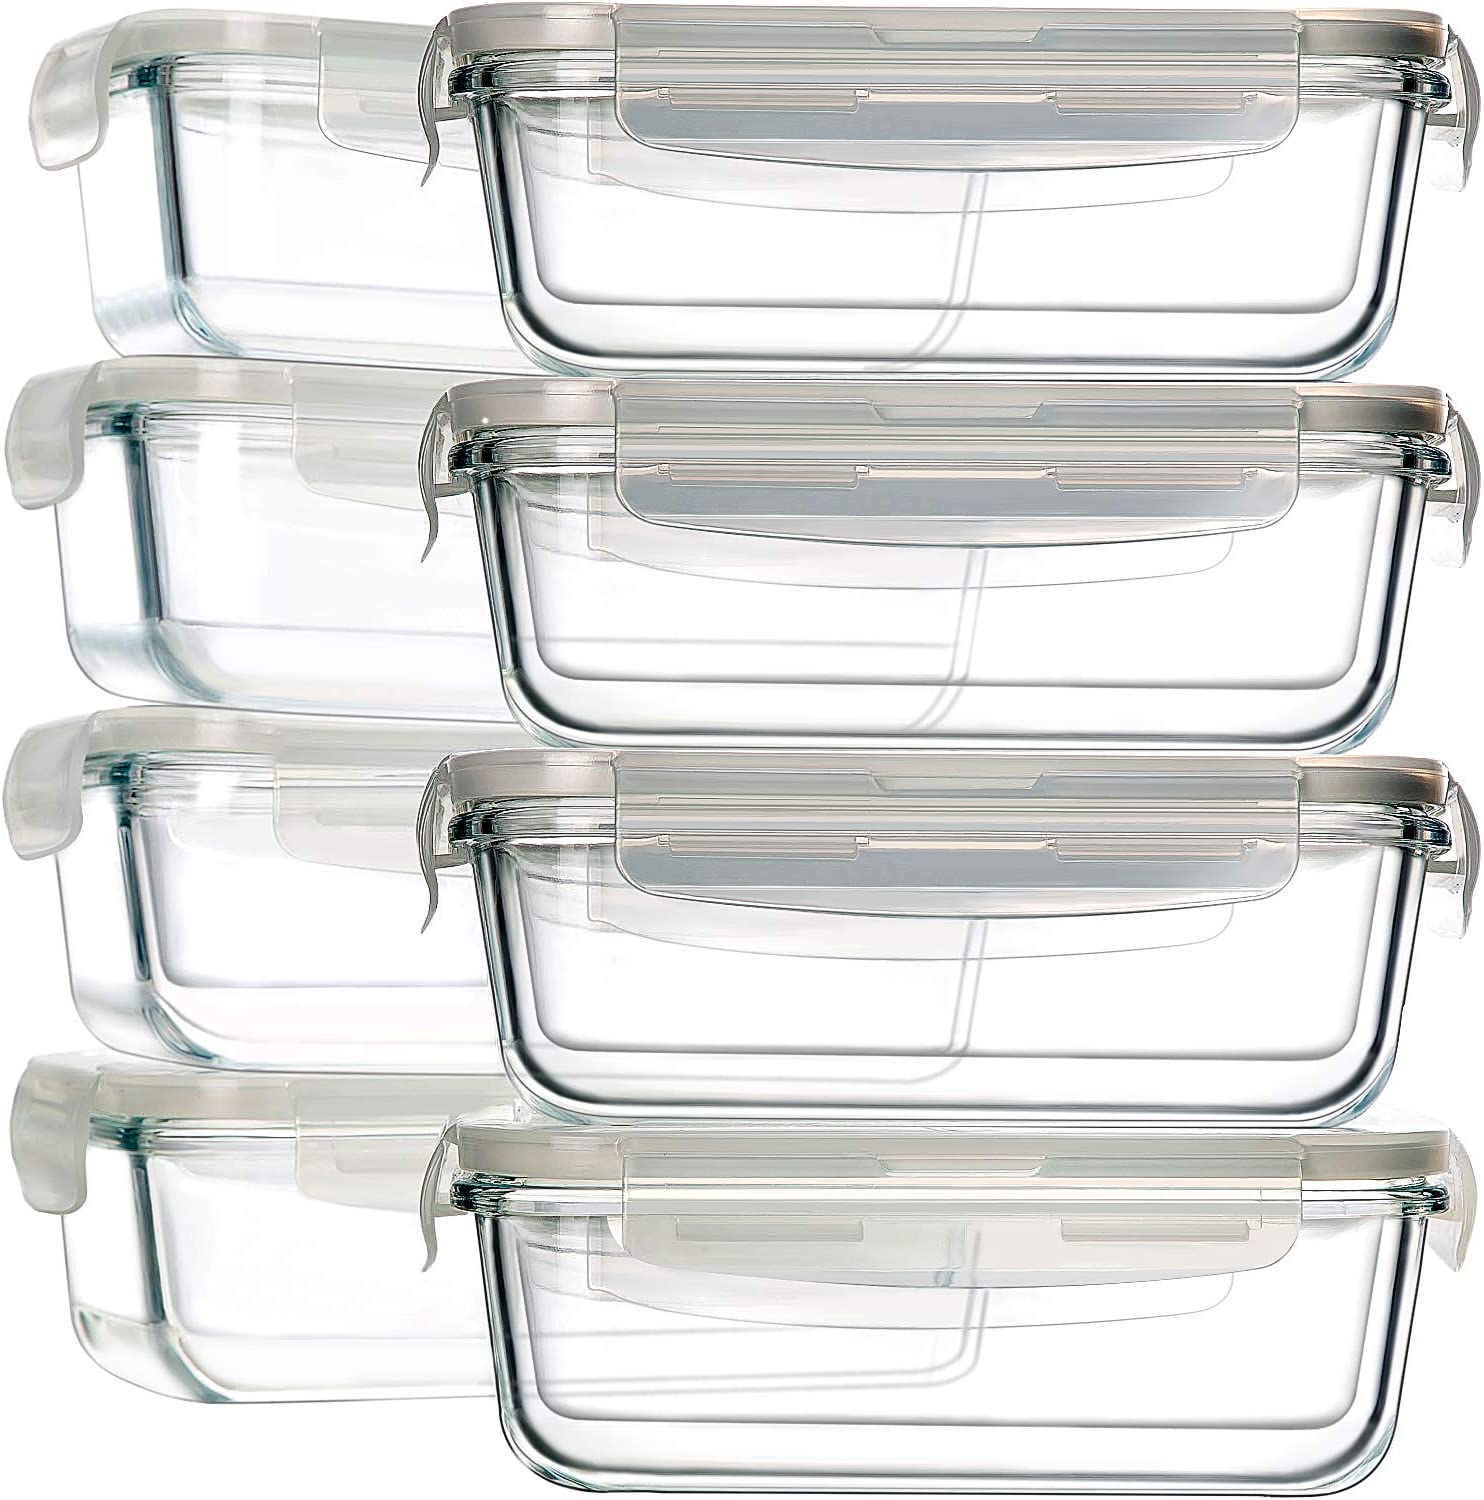 FineDine 6-Piece Superior Glass Food Storage Containers Set, 32oz Capacity  - Newly Innovated Hinged Locking lids - 100% Leakproof Glass Meal-Prep